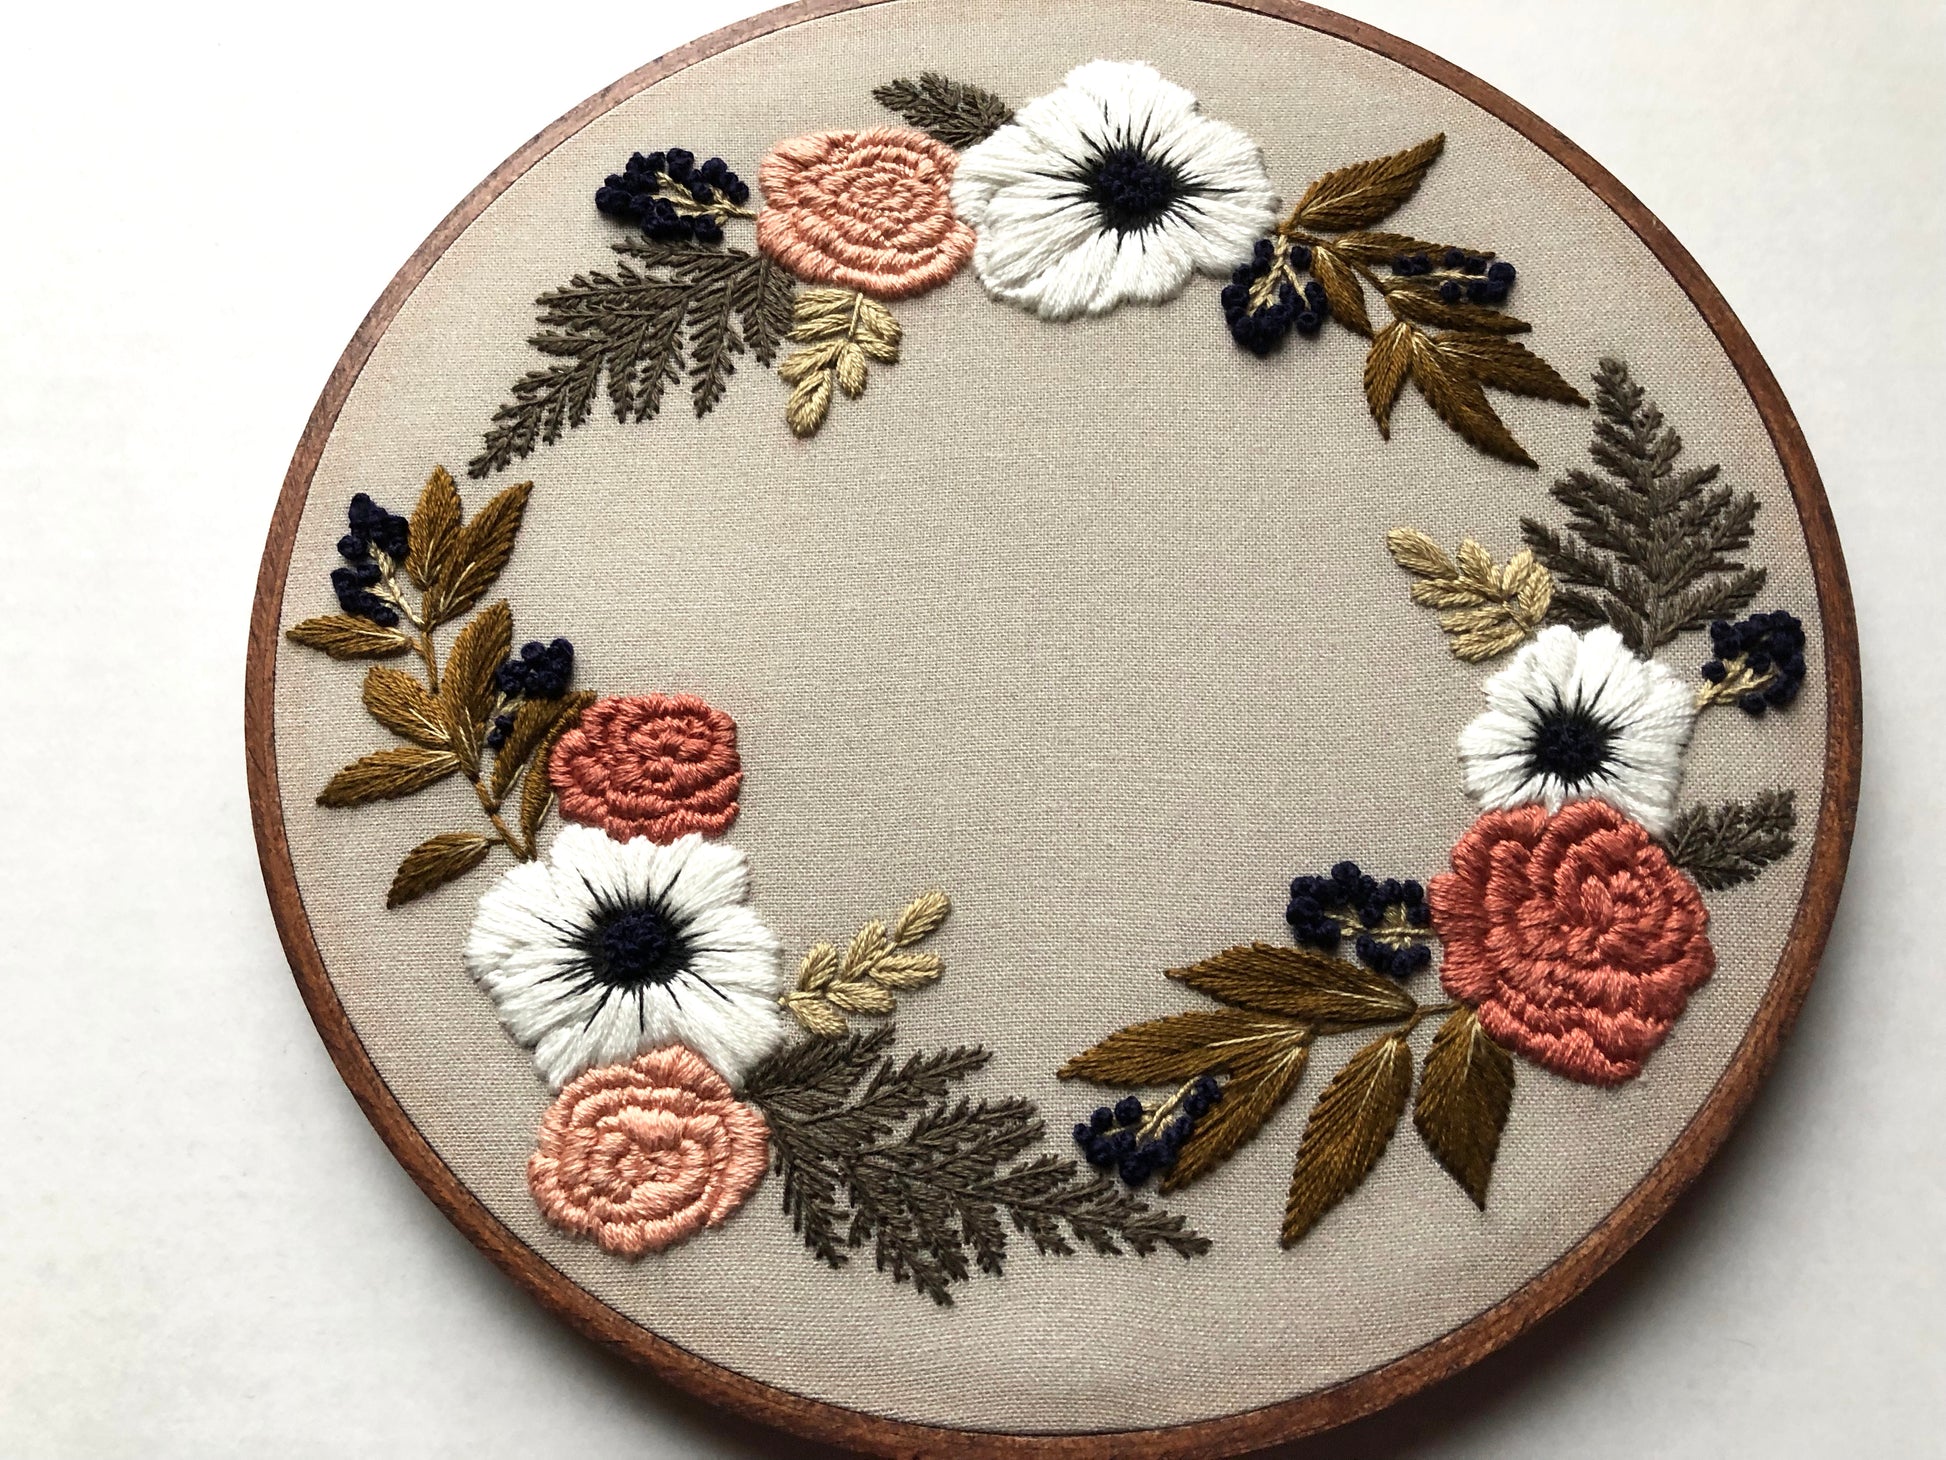 Just Peachy Embroidery Kit Floral Embroidery Kit Flower -   Embroidery  kit flower, Hand embroidery flowers, Embroidery kits